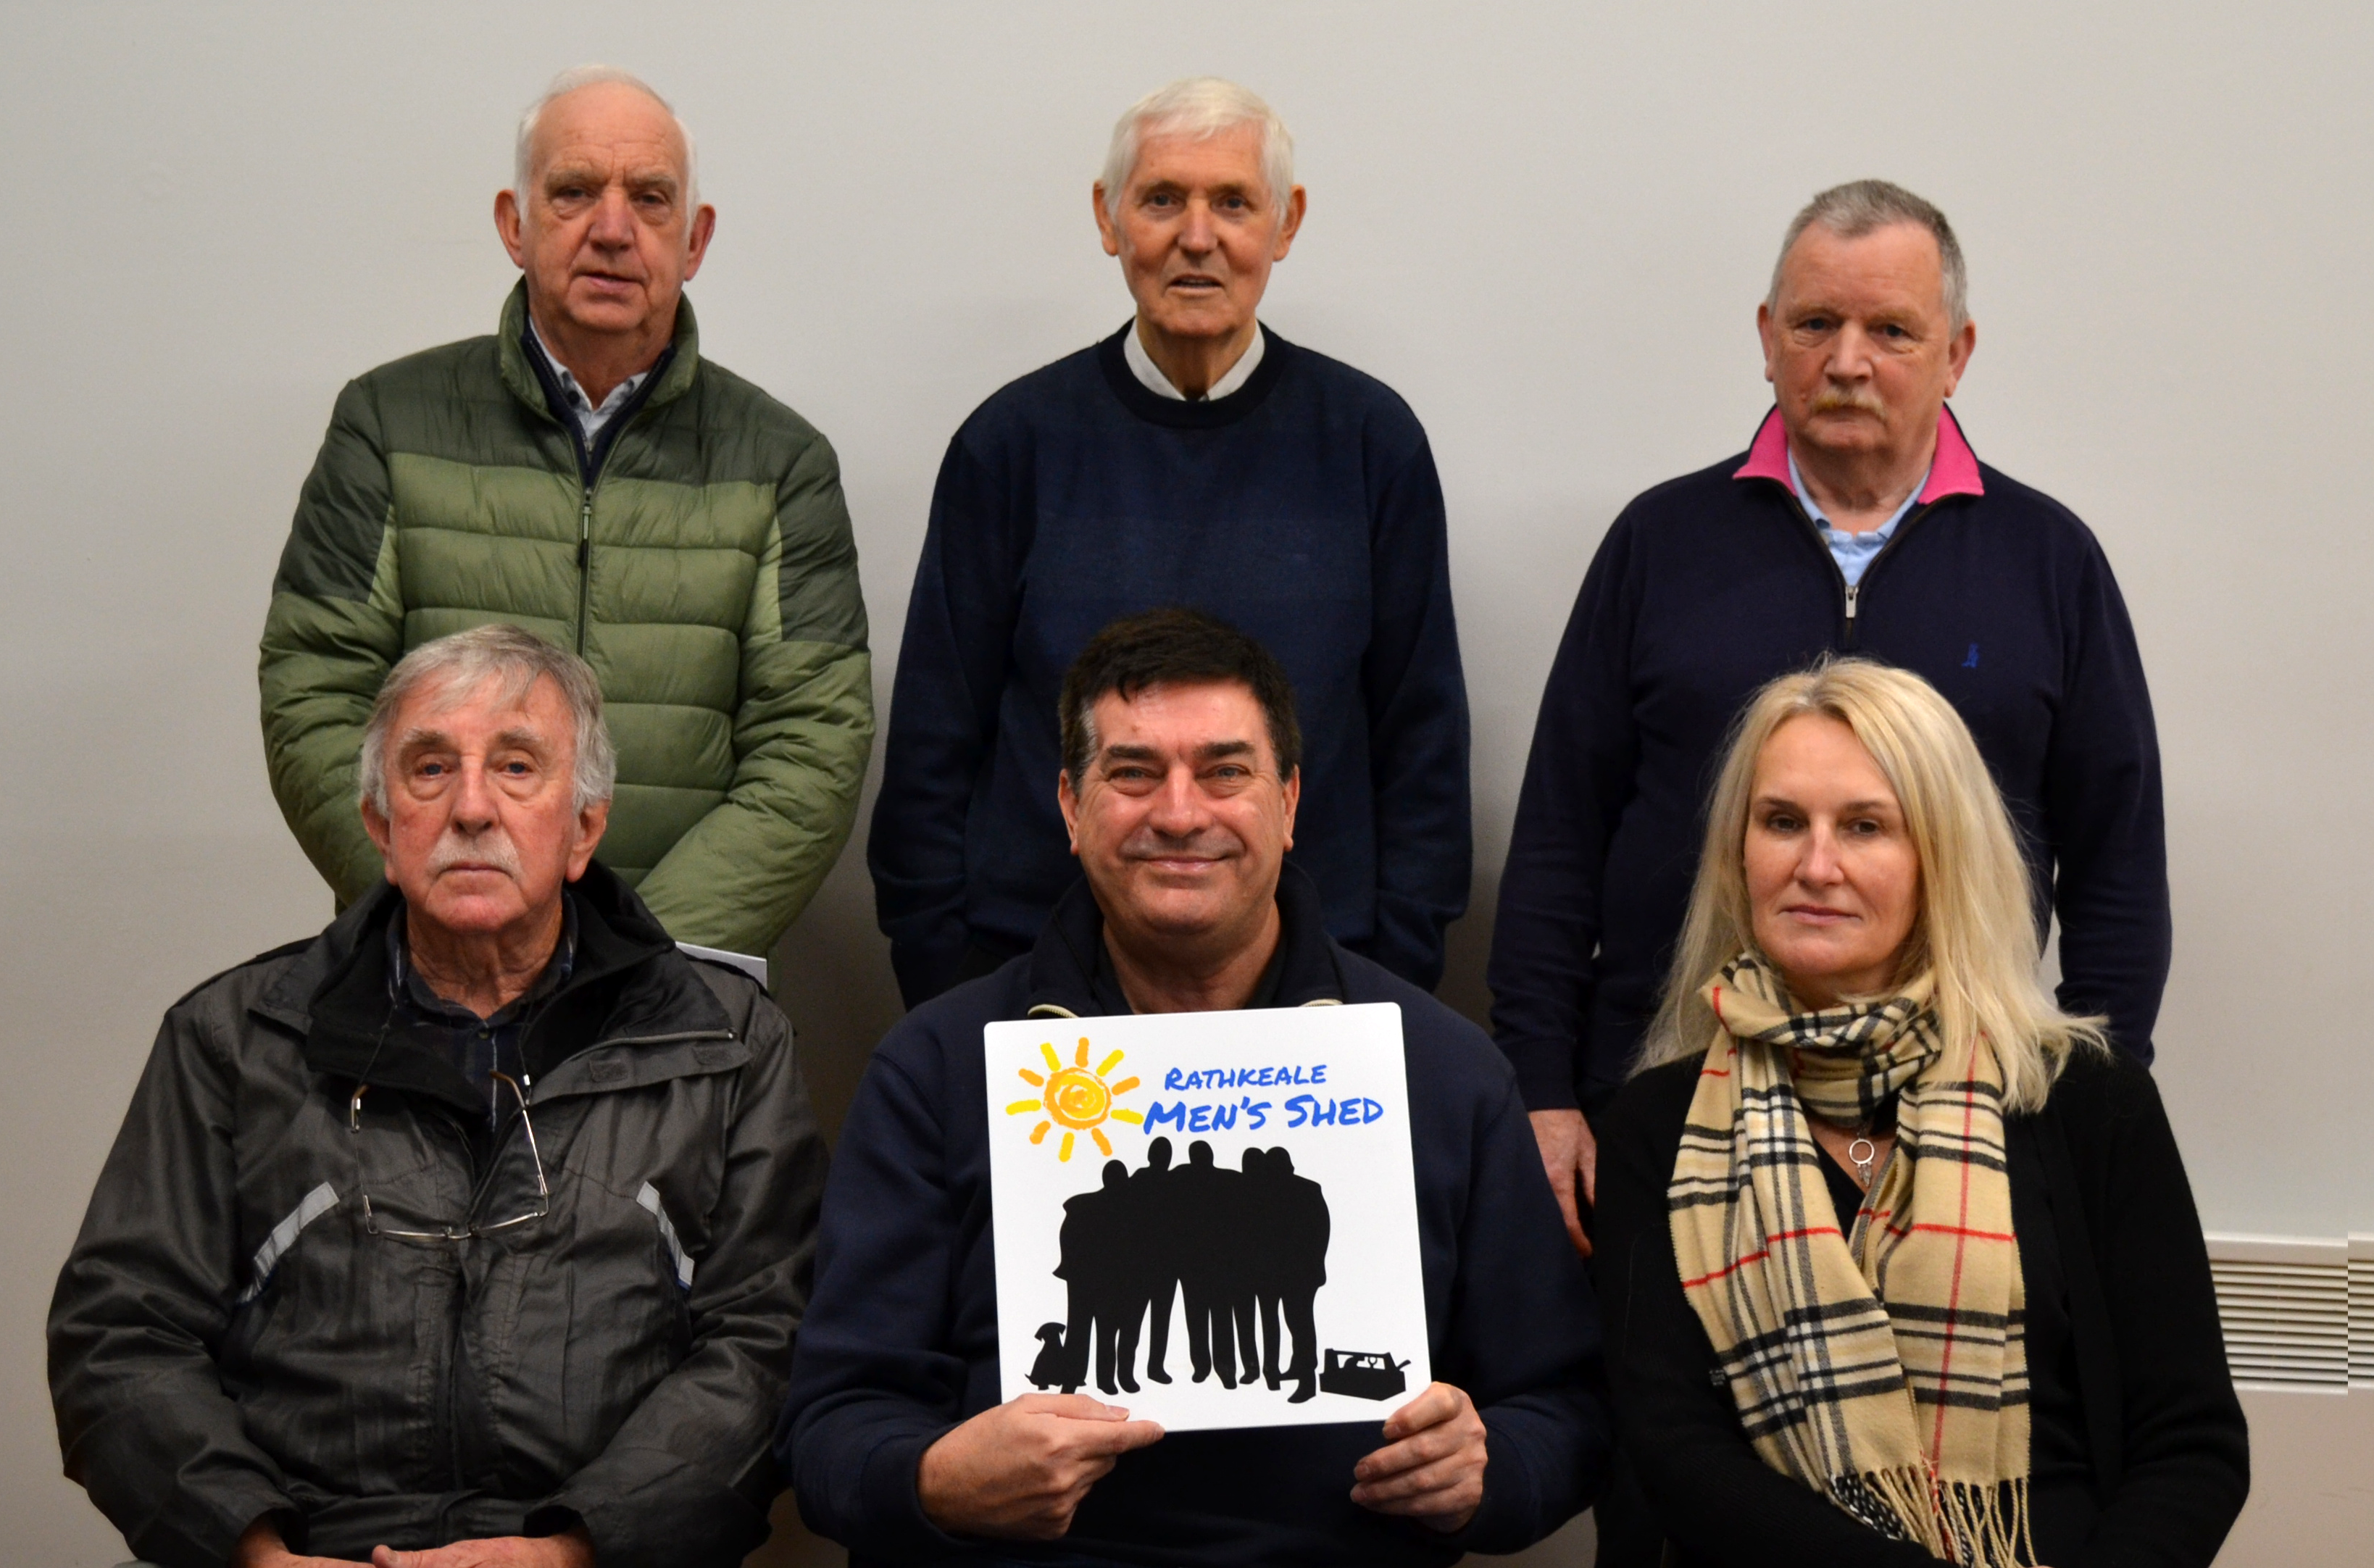 Rathkeale Mens Shed members enjoy physical, creative, educational, and volunteering activities